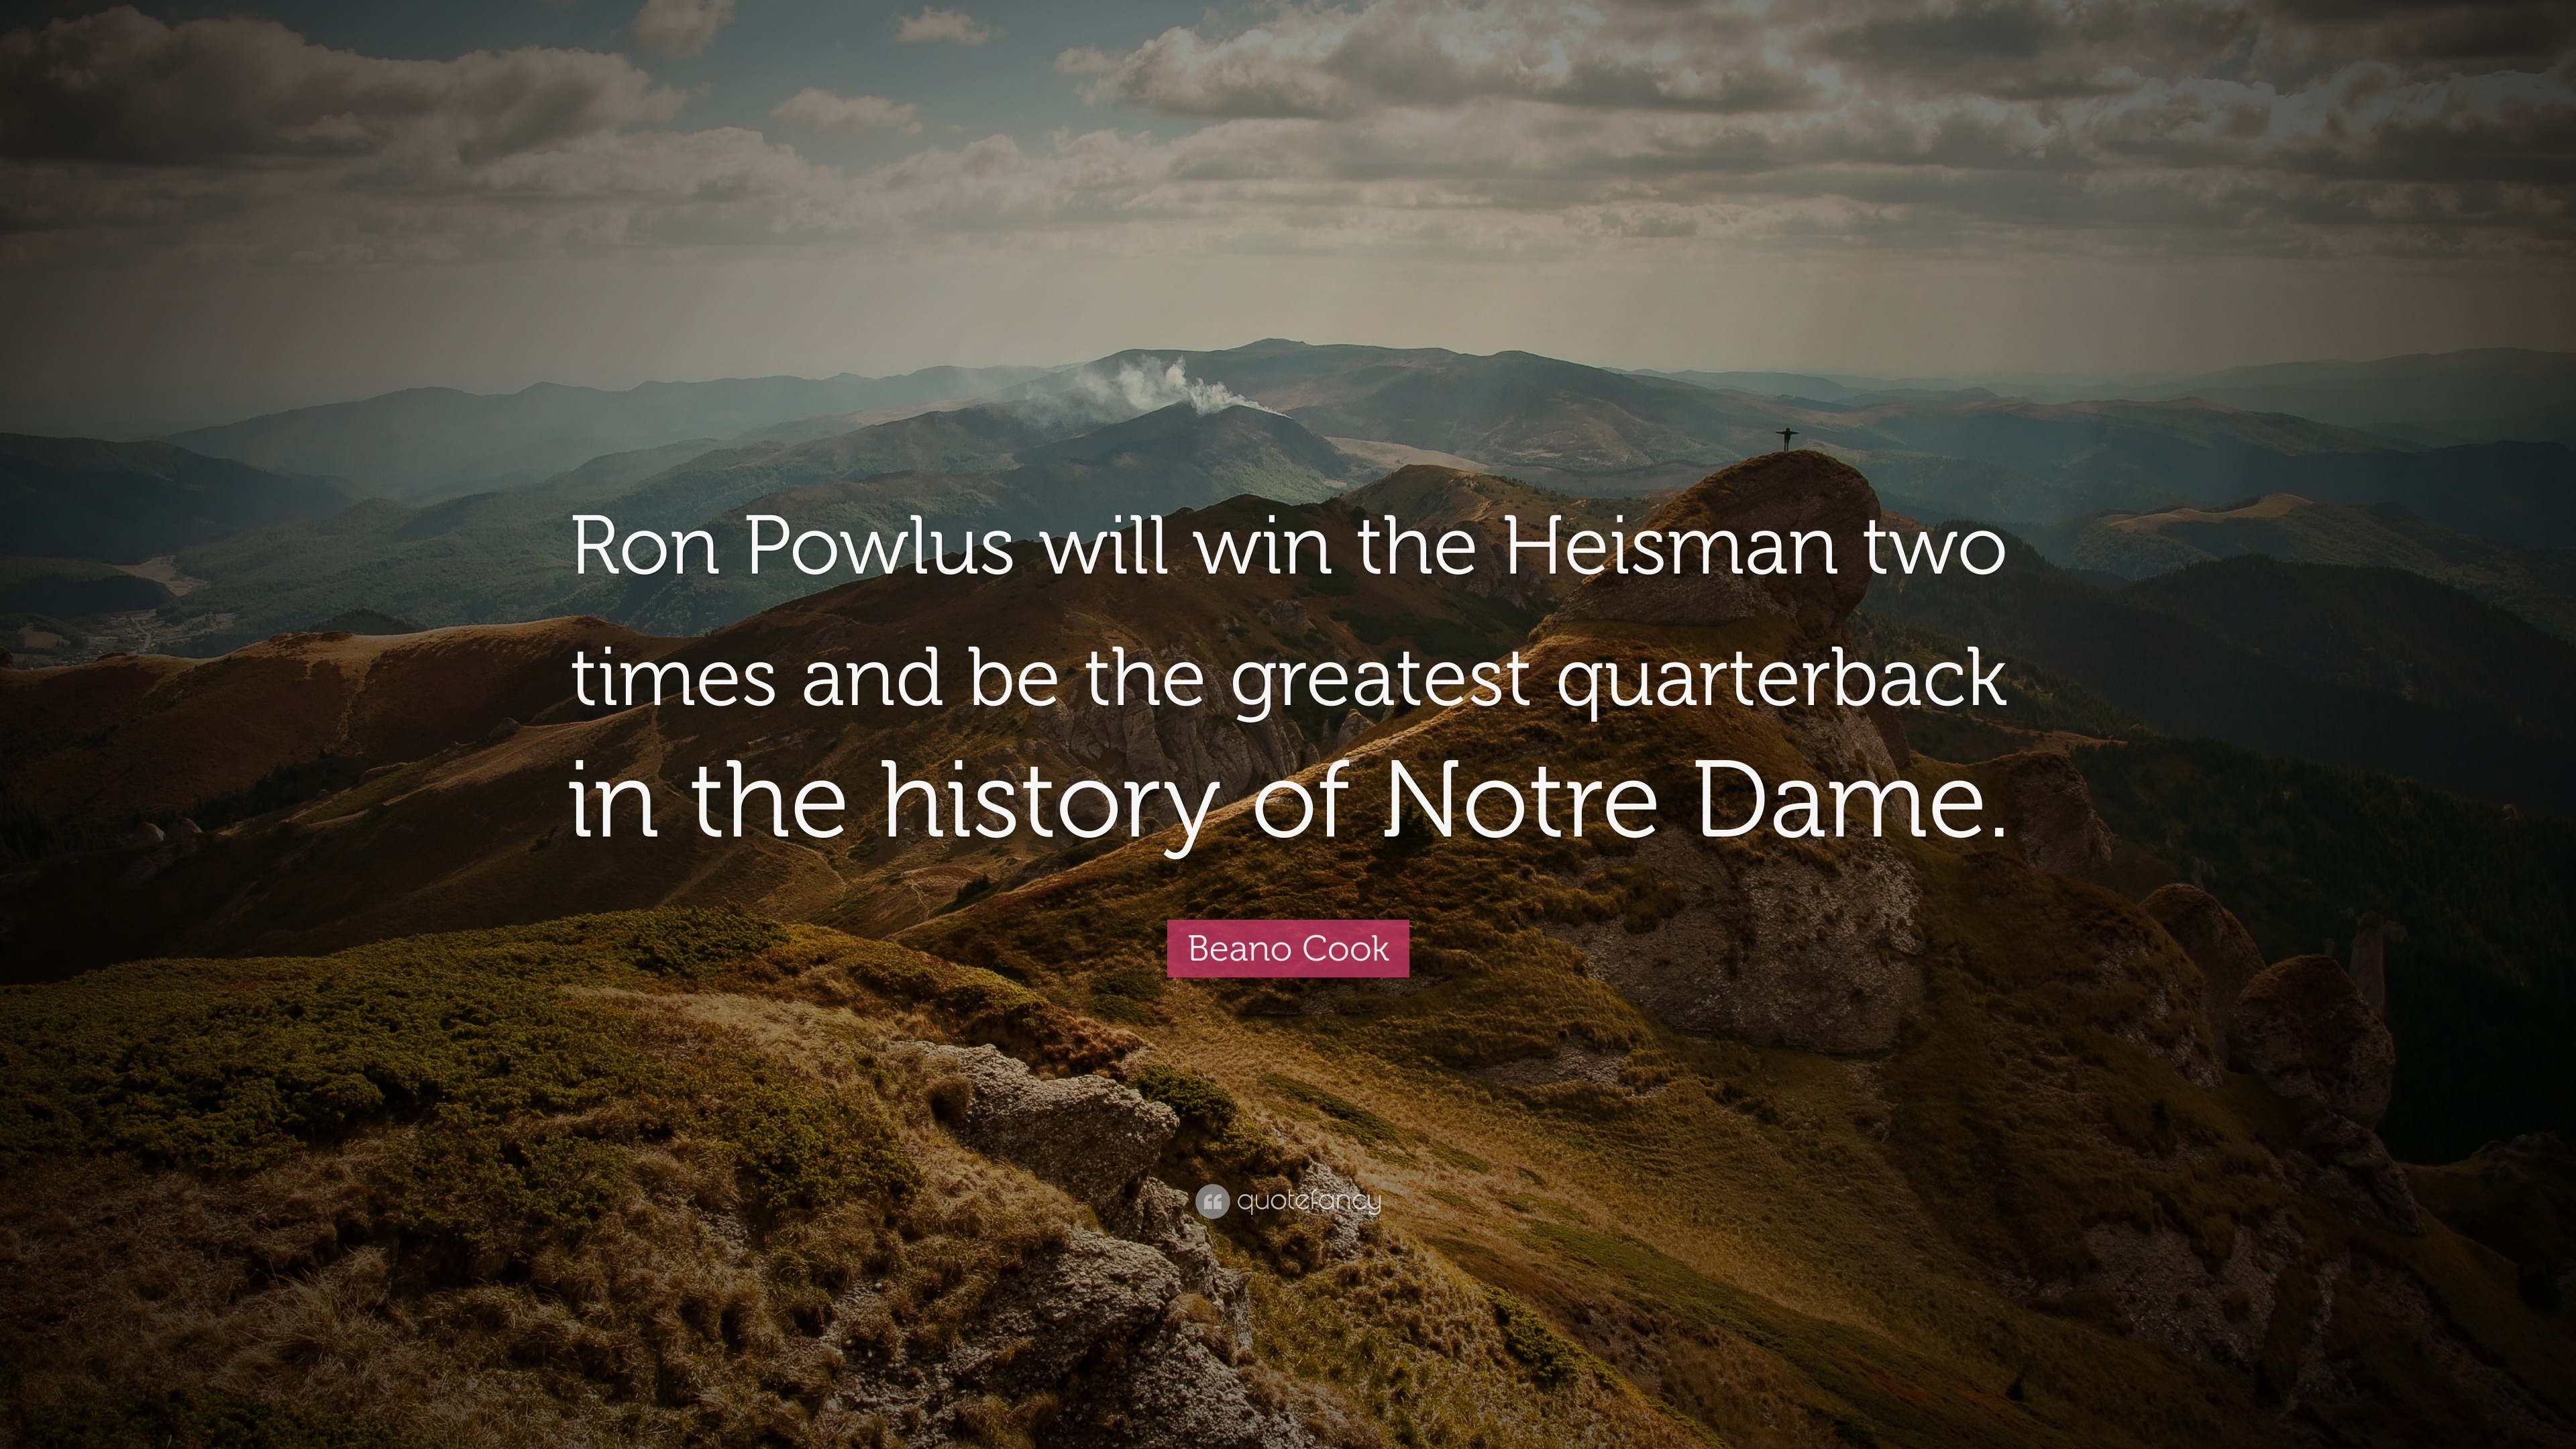 1576699-Beano-Cook-Quote-Ron-Powlus-will-win-the-Heisman-two-times-and-be.jpg